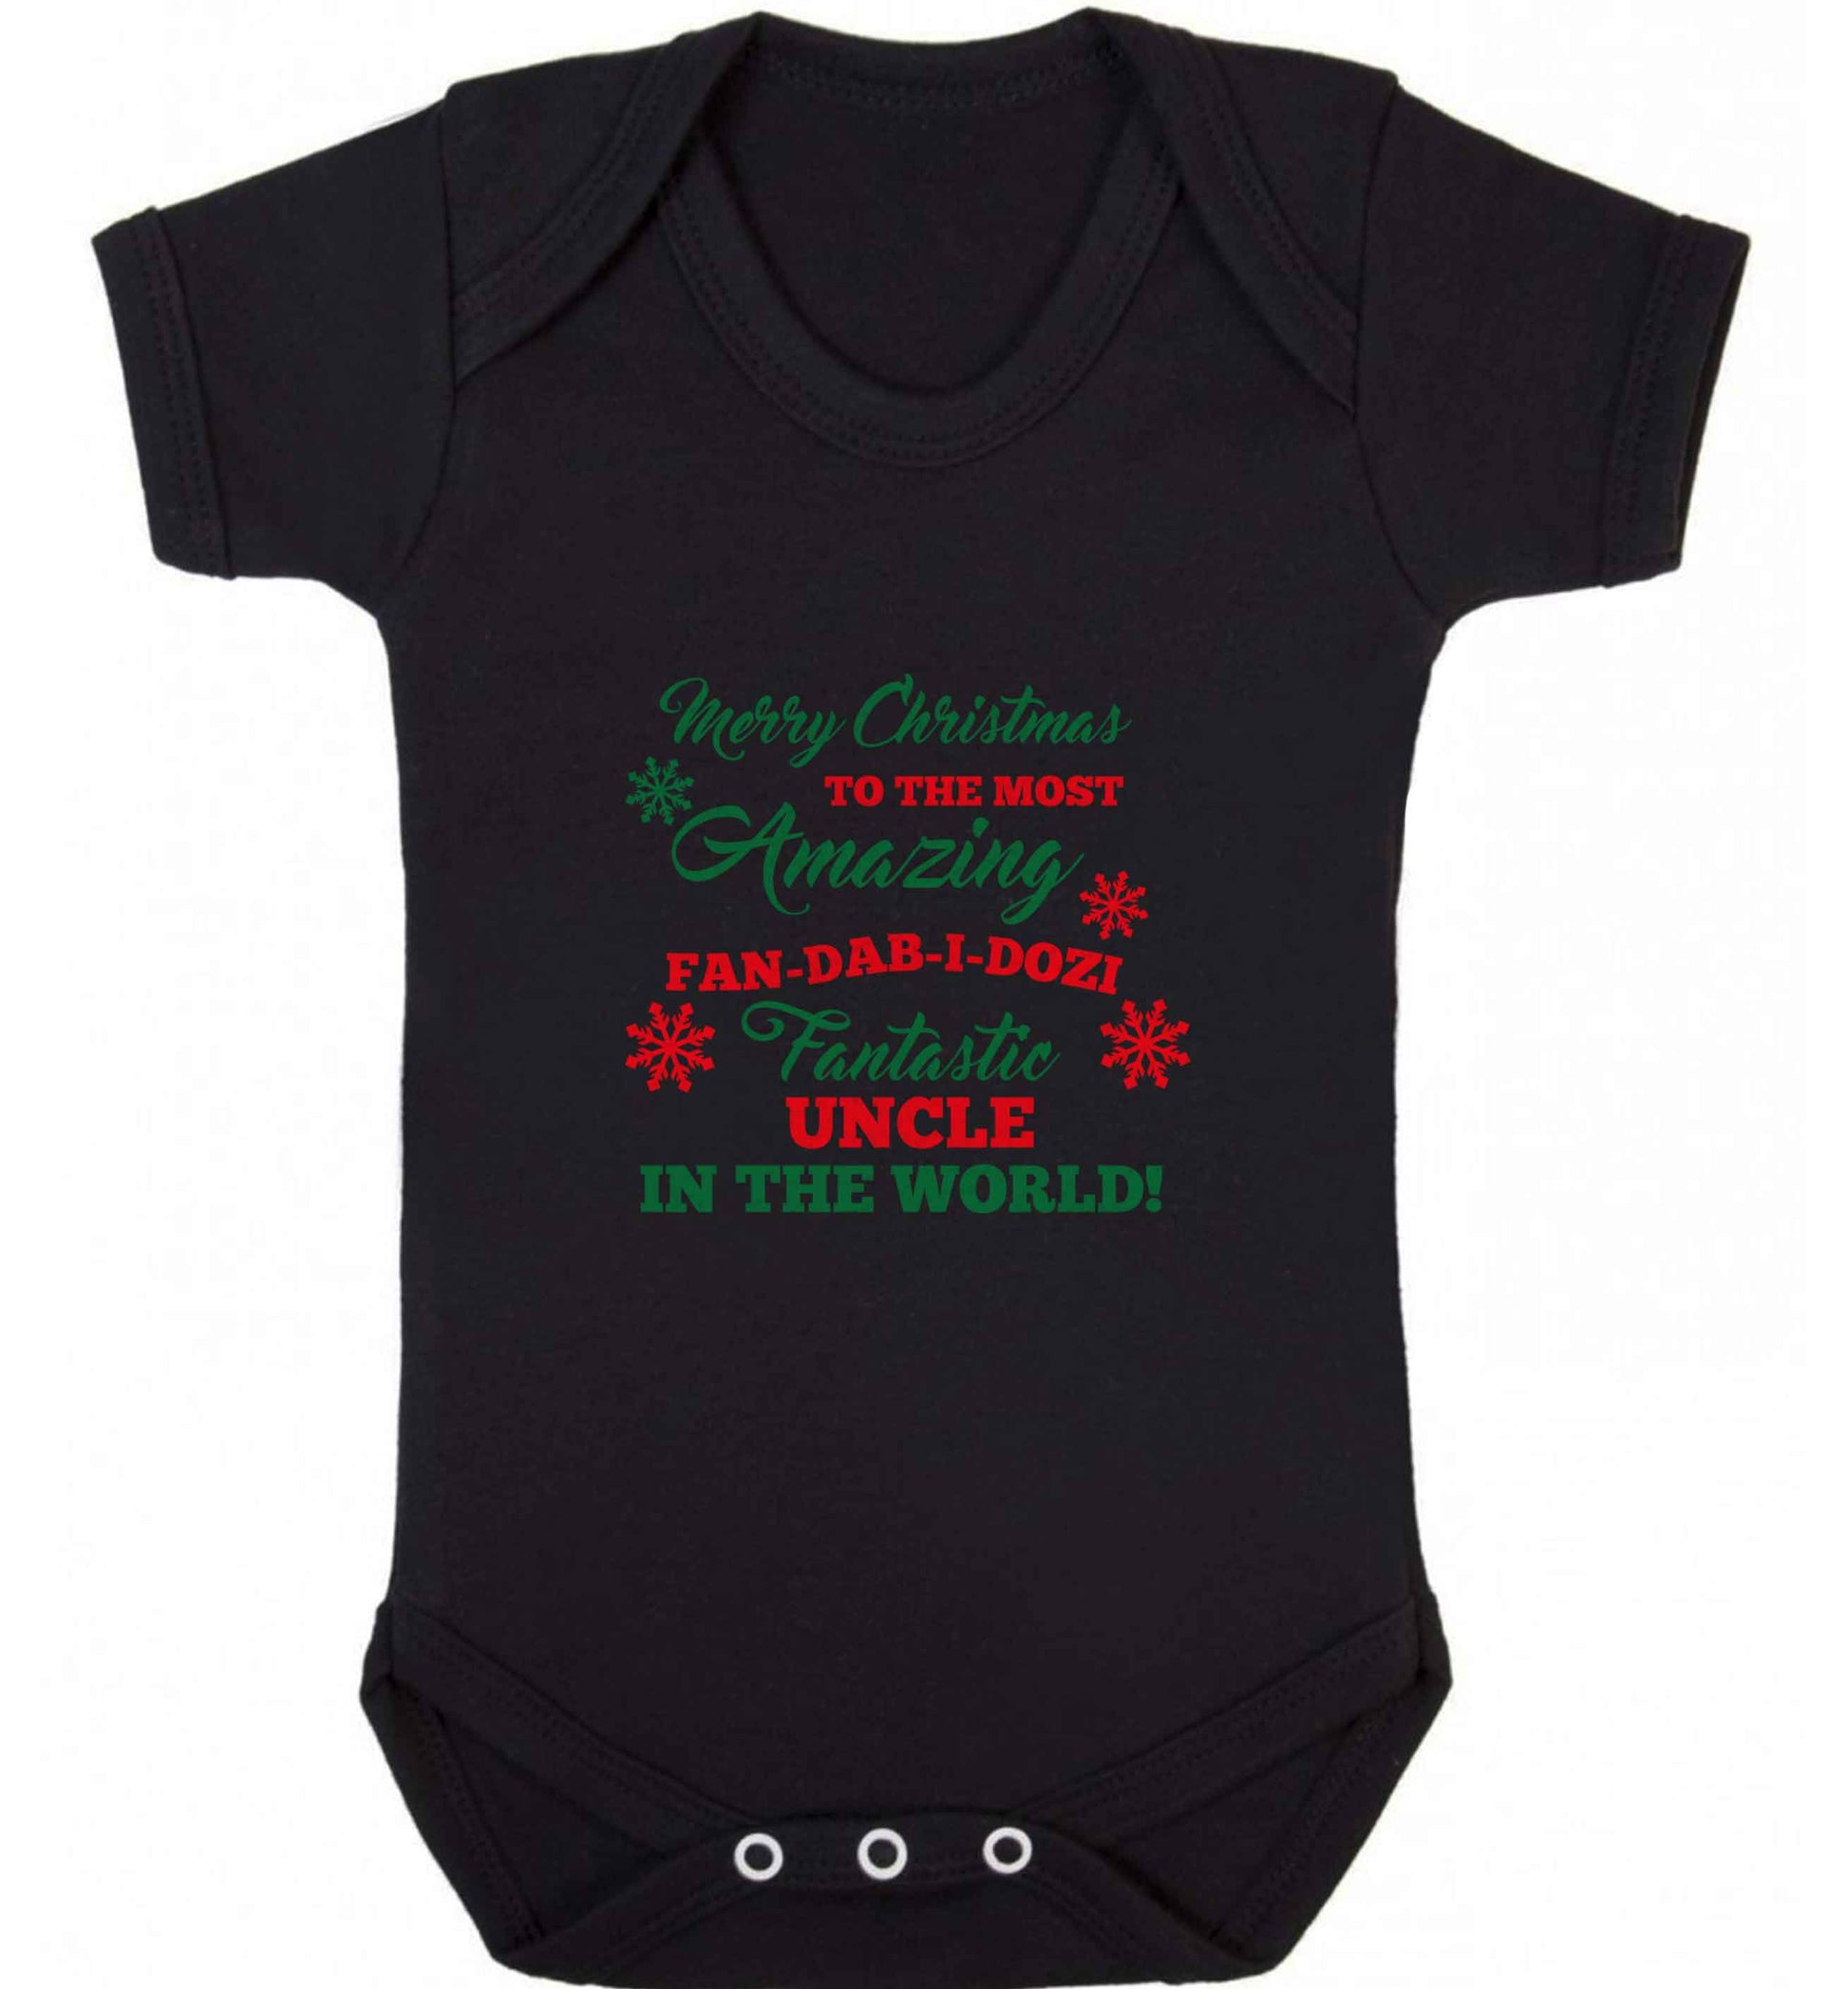 Merry Christmas to the most amazing fan-dab-i-dozi fantasic Uncle in the world baby vest black 18-24 months